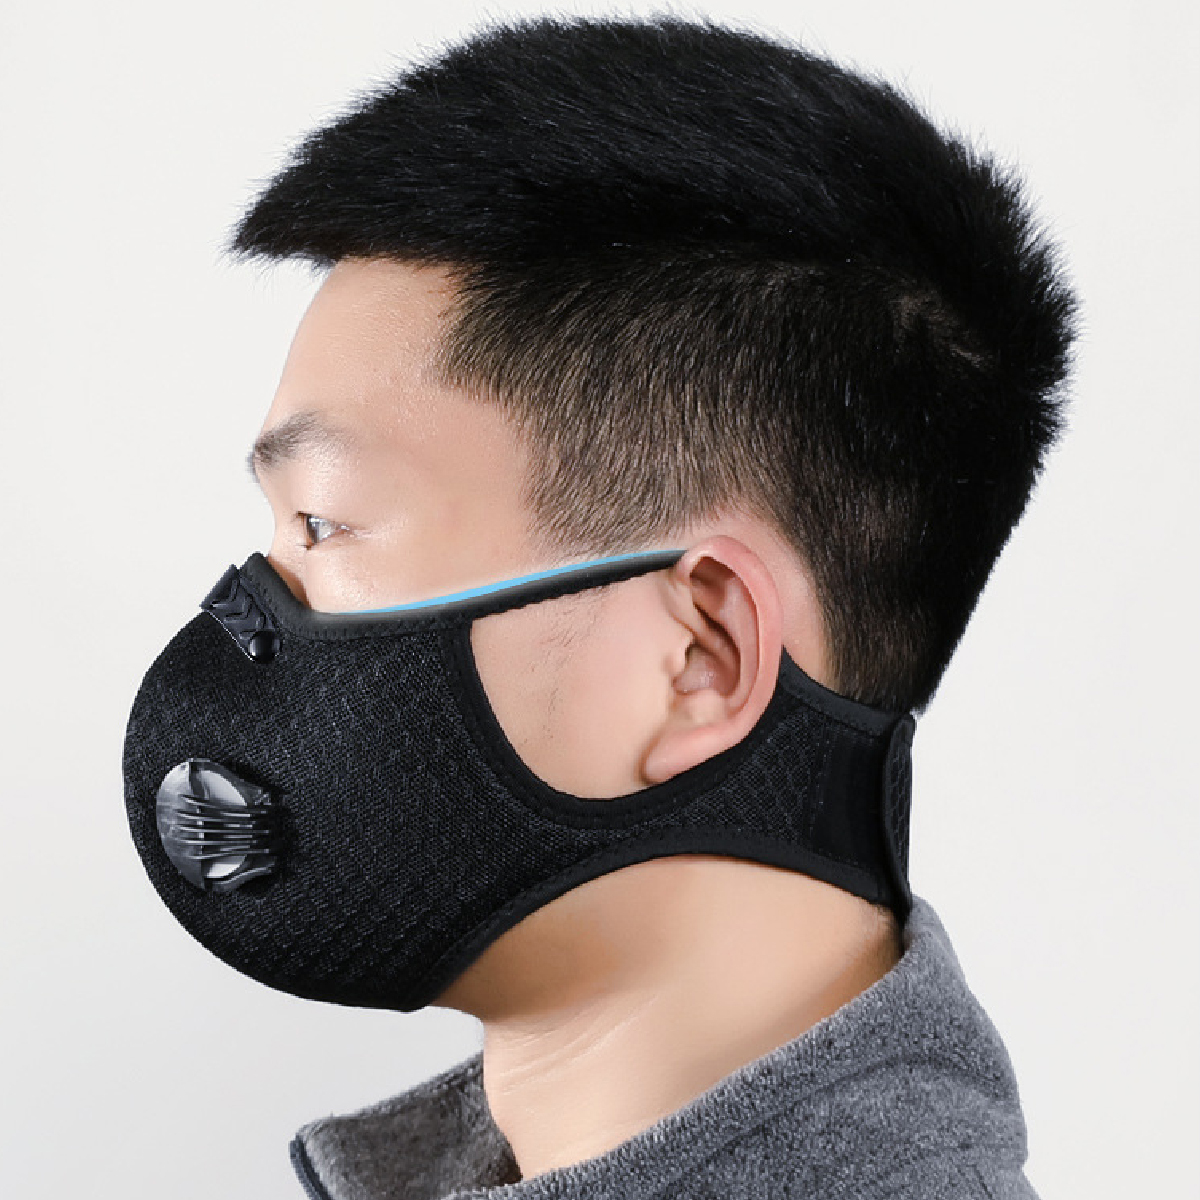 Cotton Mask 5-Layer Protect Cycling Face Masks anti Smoke Dust Fog PM2.5 Anti-Pollution with Breathing Valve